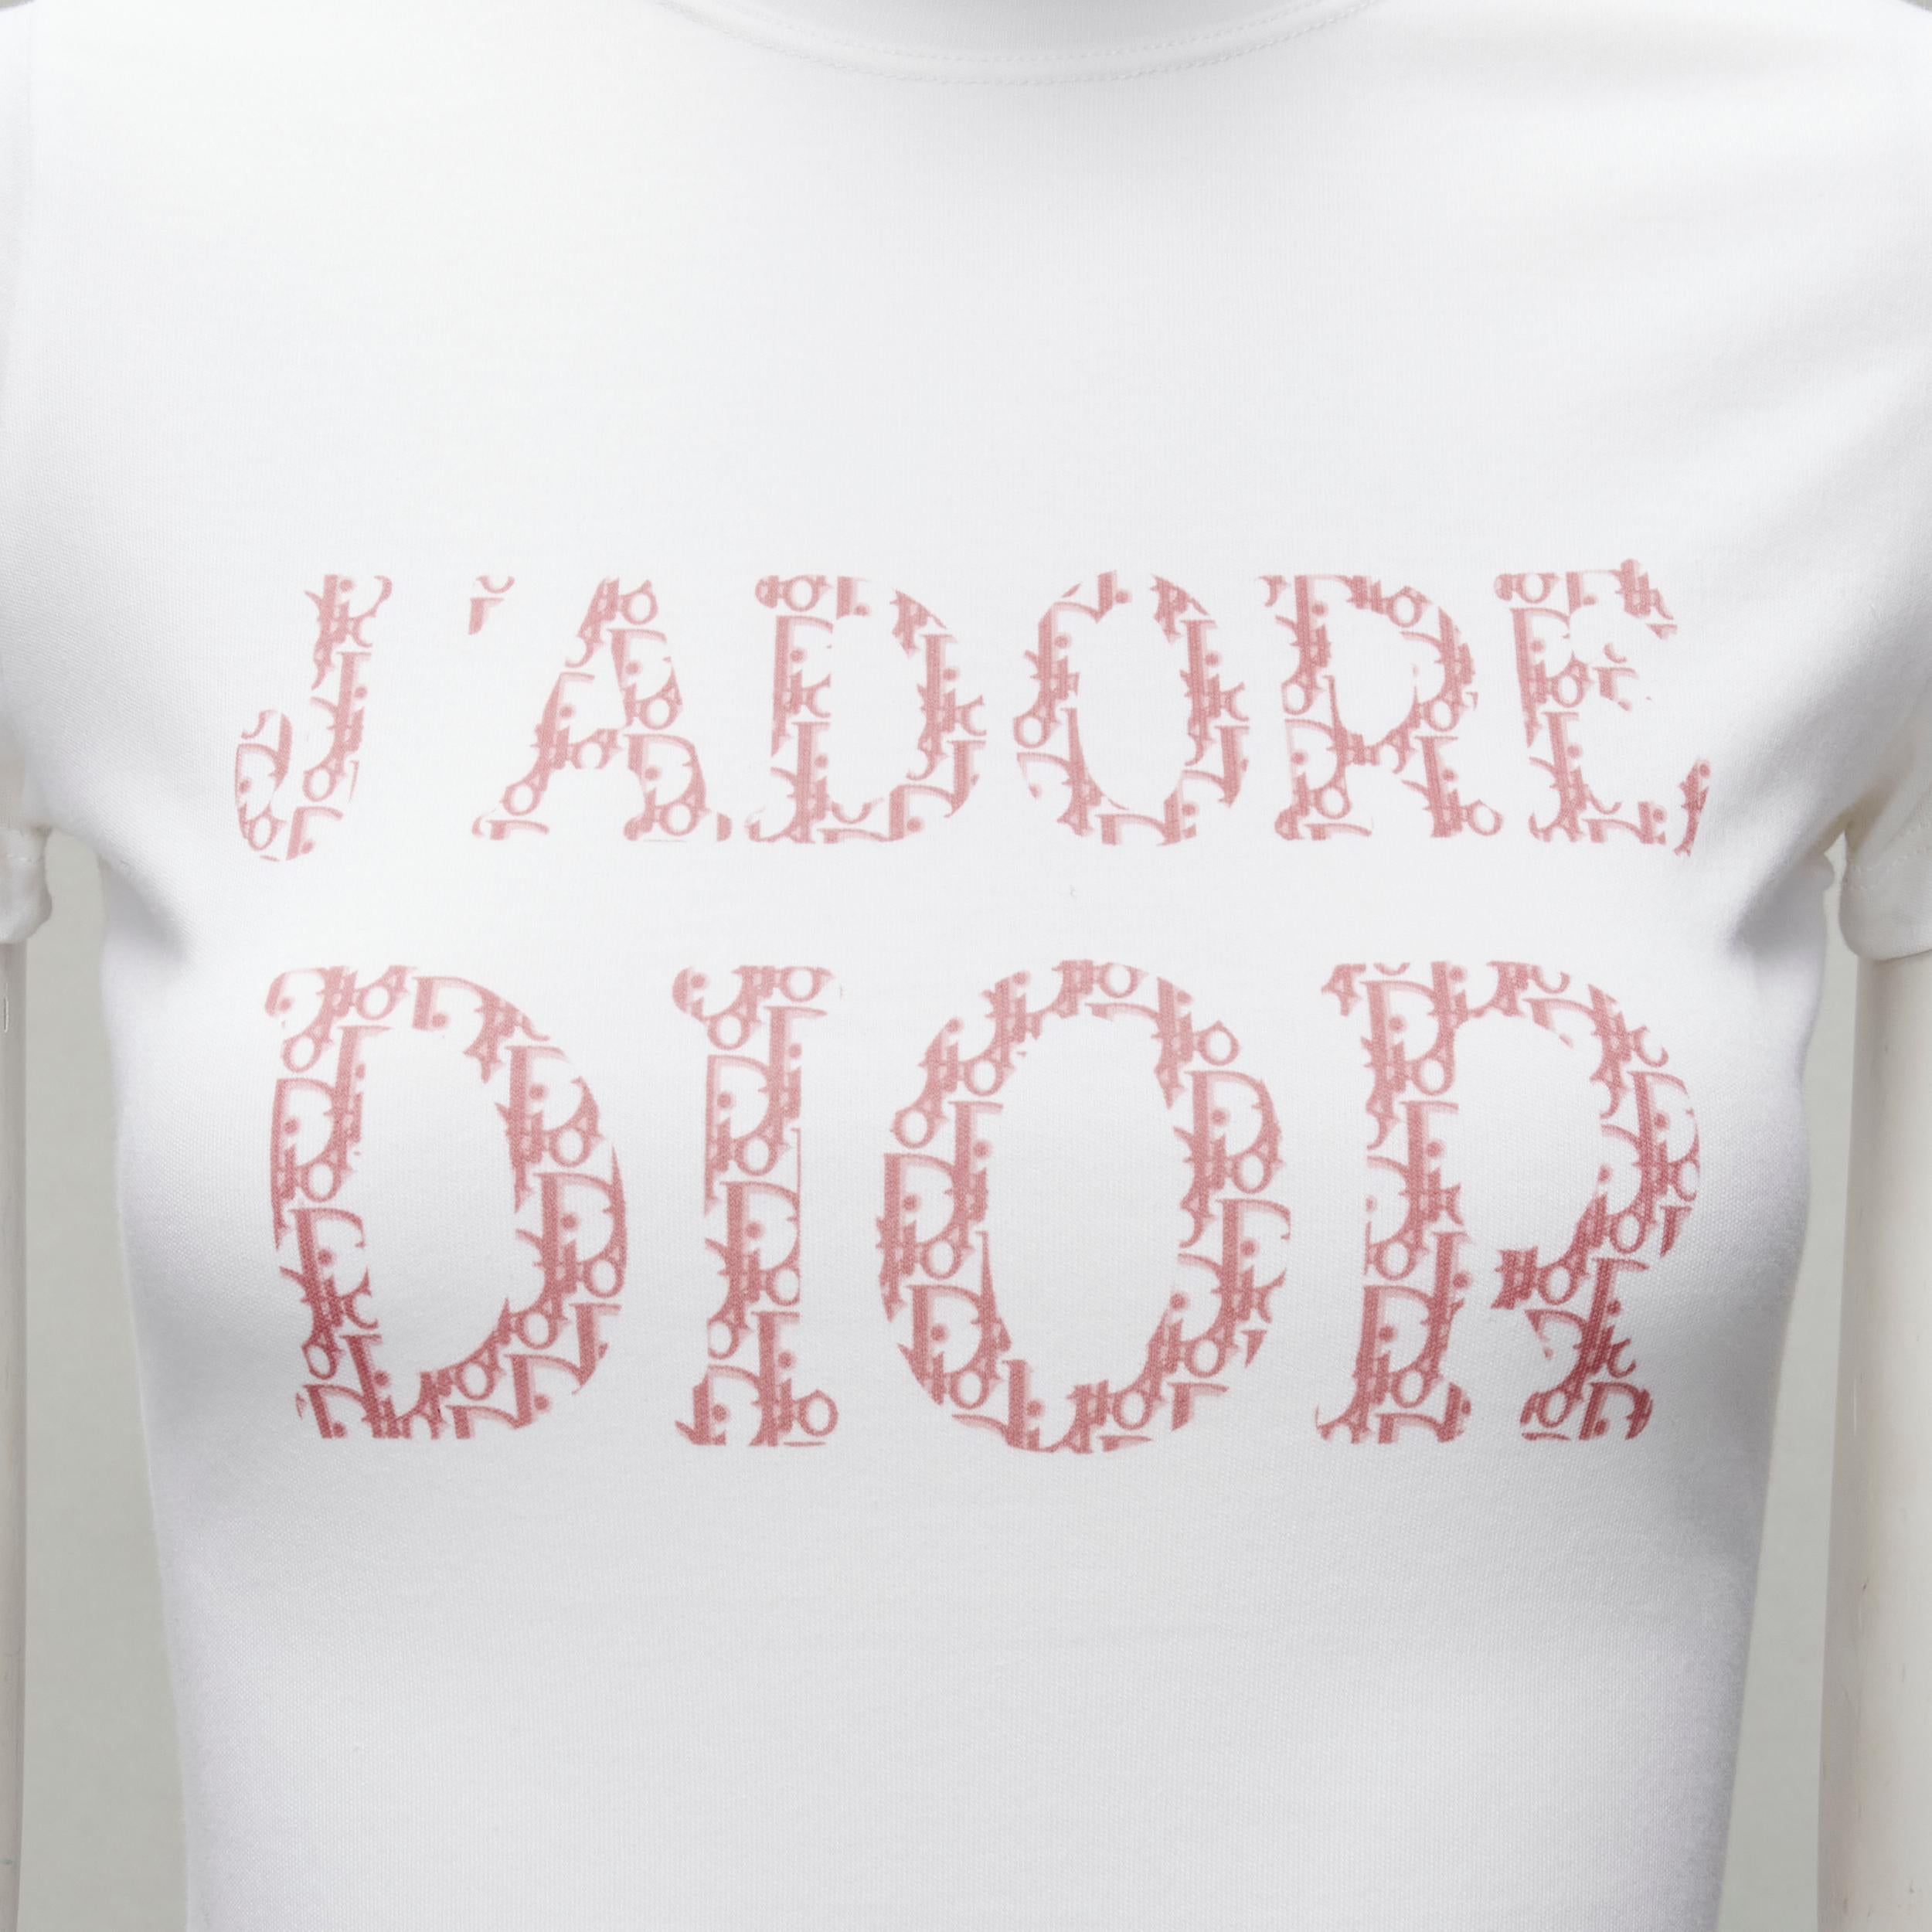 CHRISTIAN DIOR Galliano Jadore white pink monogram slogan tshirt FR40 L
Reference: TGAS/C01687
Brand: Christian Dior
Designer: John Galliano
Collection: Jadore Dior
Material: Cotton
Color: Pink, White
Pattern: Monogram
Closure: Pullover
Extra